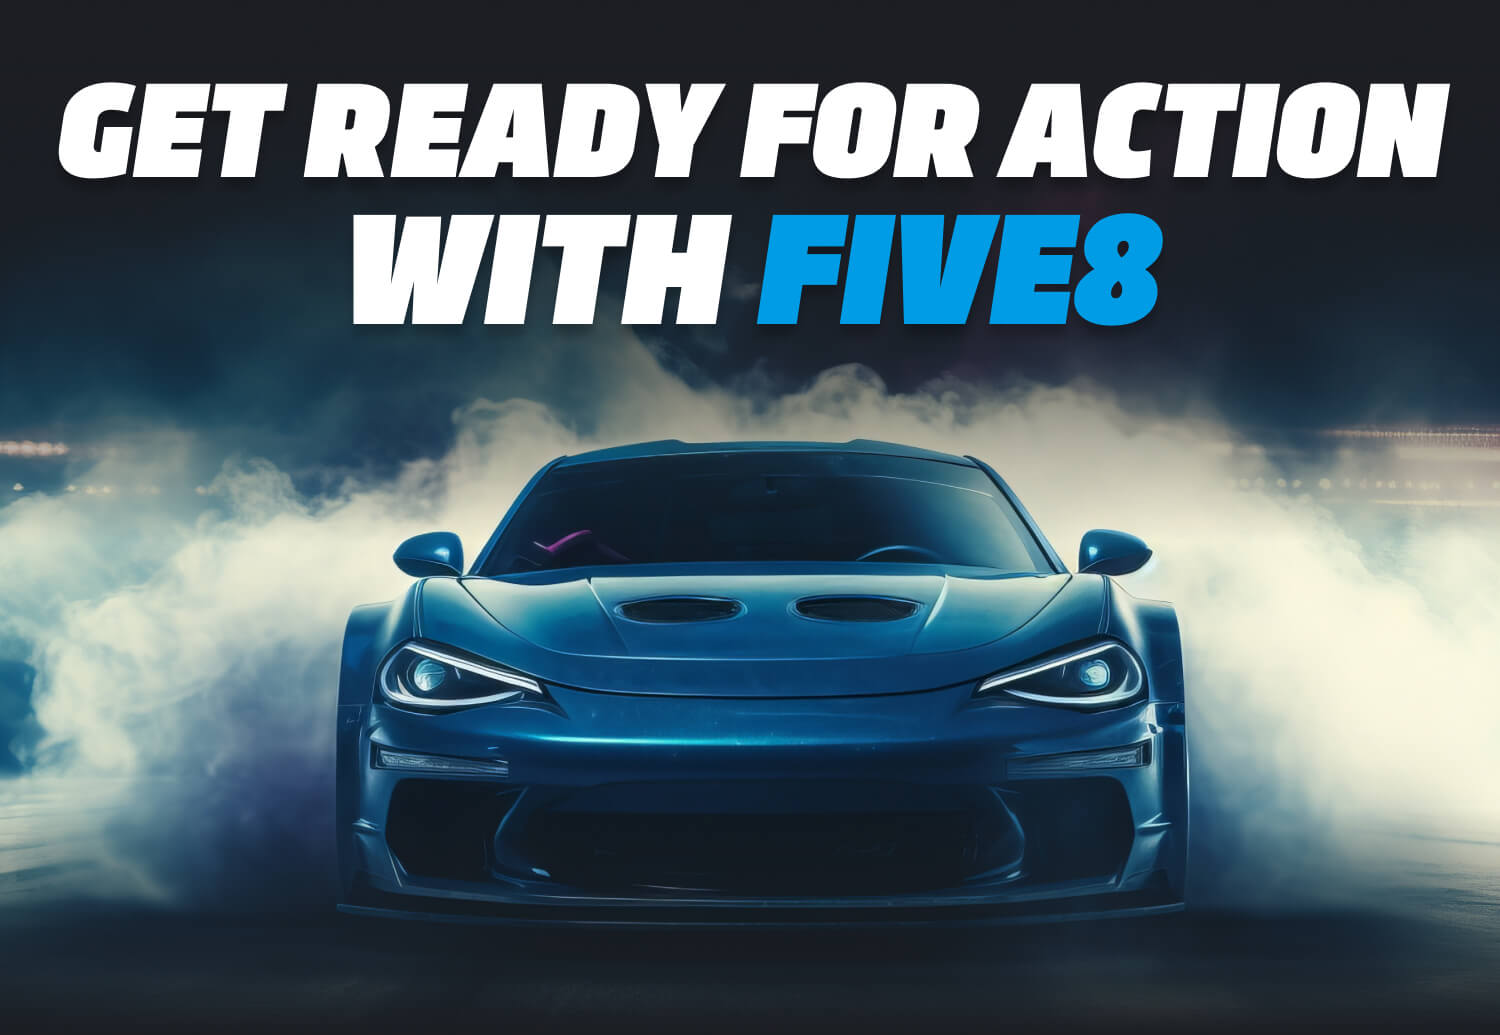 Get Ready for Action with FIVE 8 